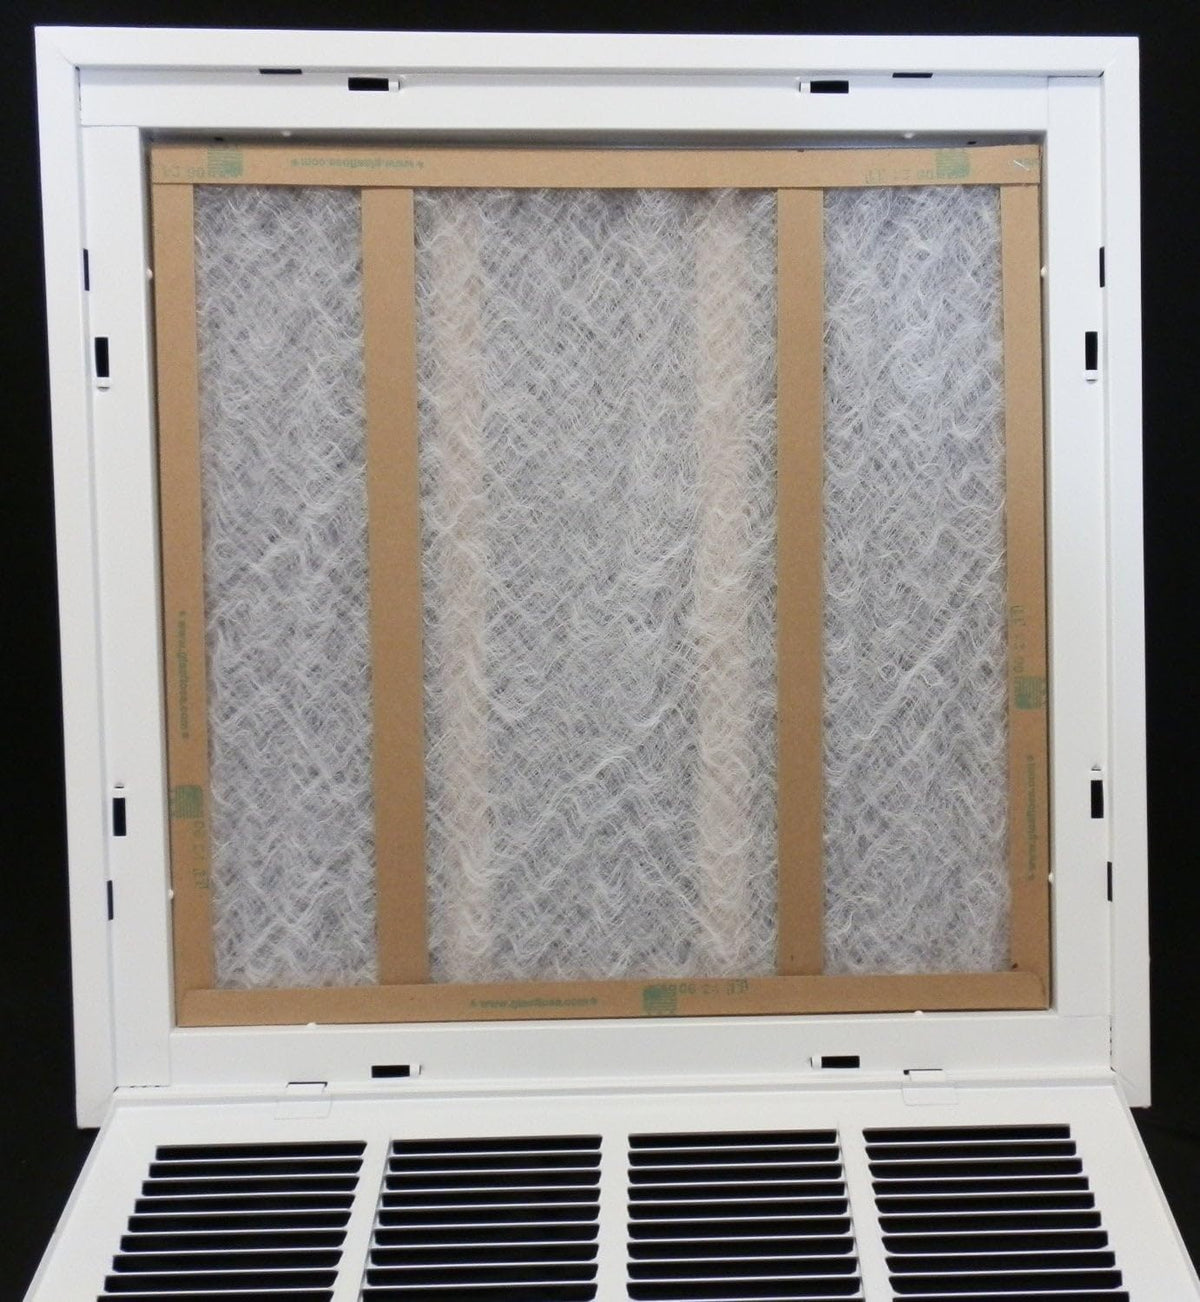 26&quot; X 24&quot; Steel Return Air Filter Grille for 1&quot; Filter - Removable Frame - [Outer Dimensions: 28 5/8&quot; X 26 5/8&quot;]